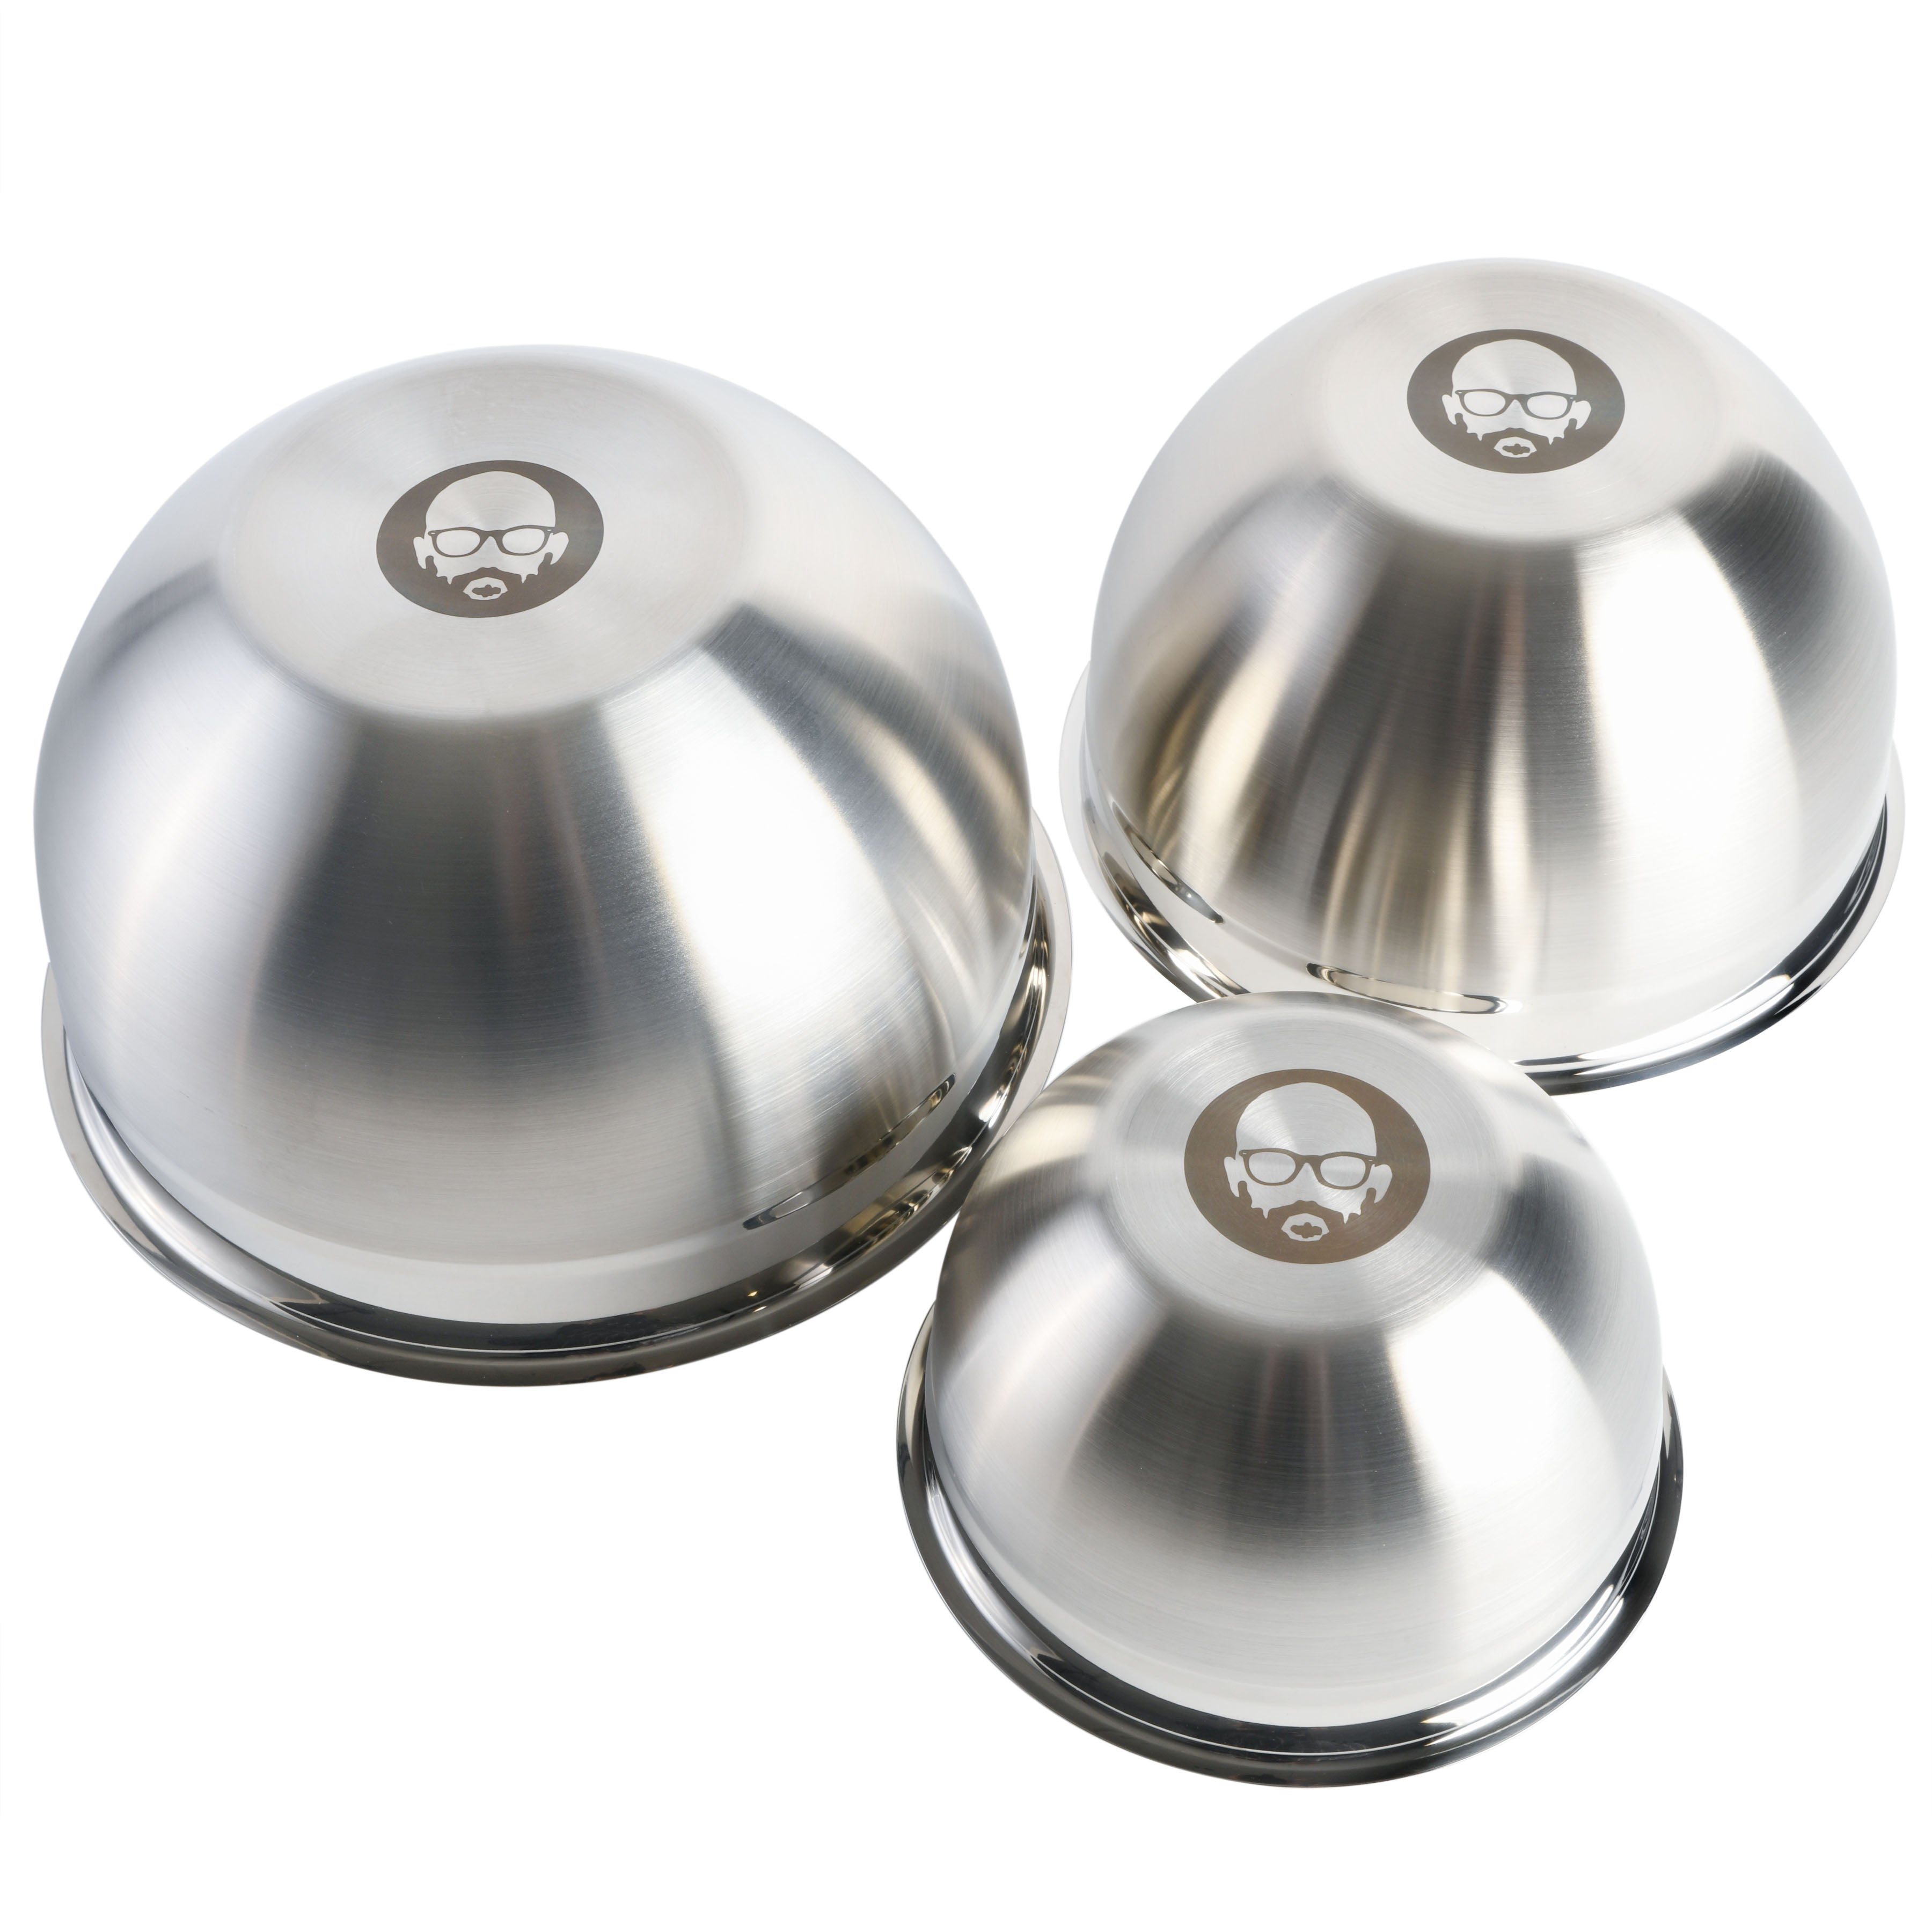 Babish Tong Set, Stainless Steel, 12 Inch & 9 Inch